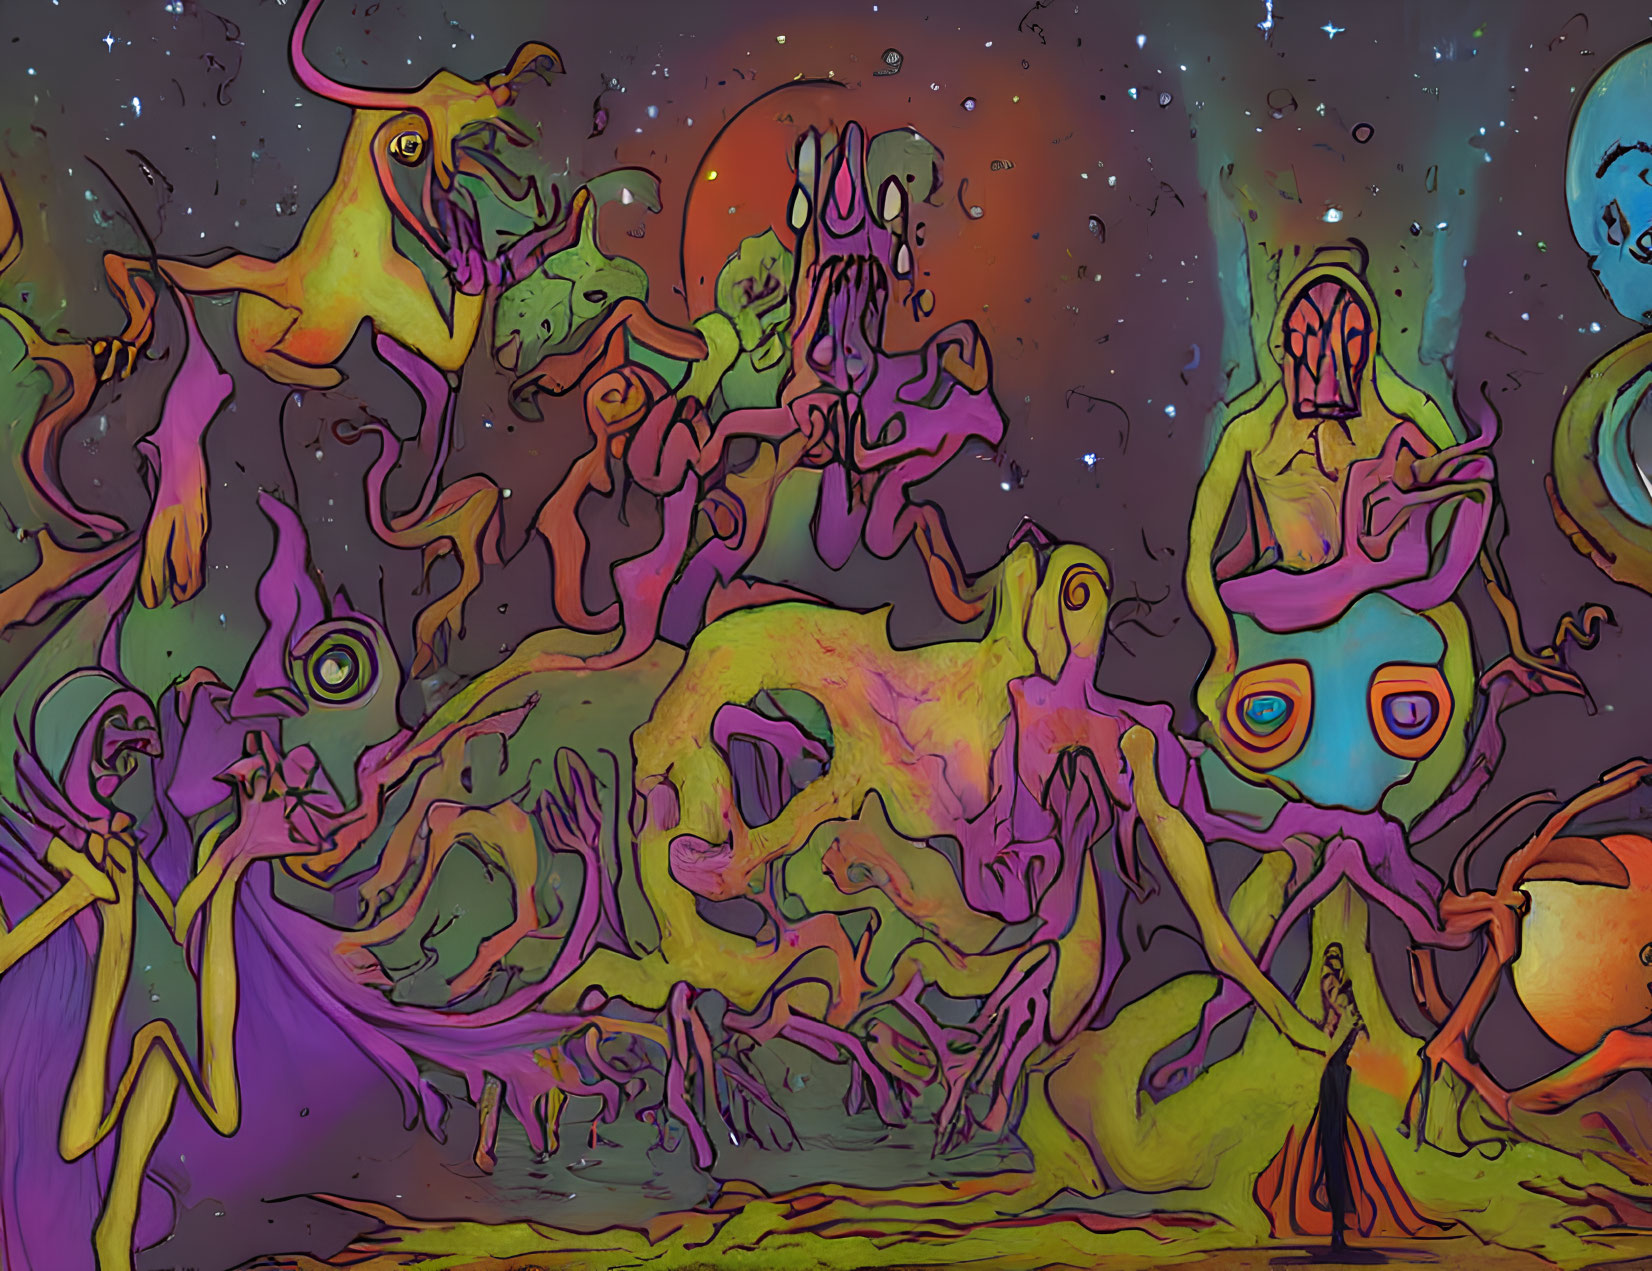 Colorful psychedelic alien creatures in dynamic poses against cosmic backdrop